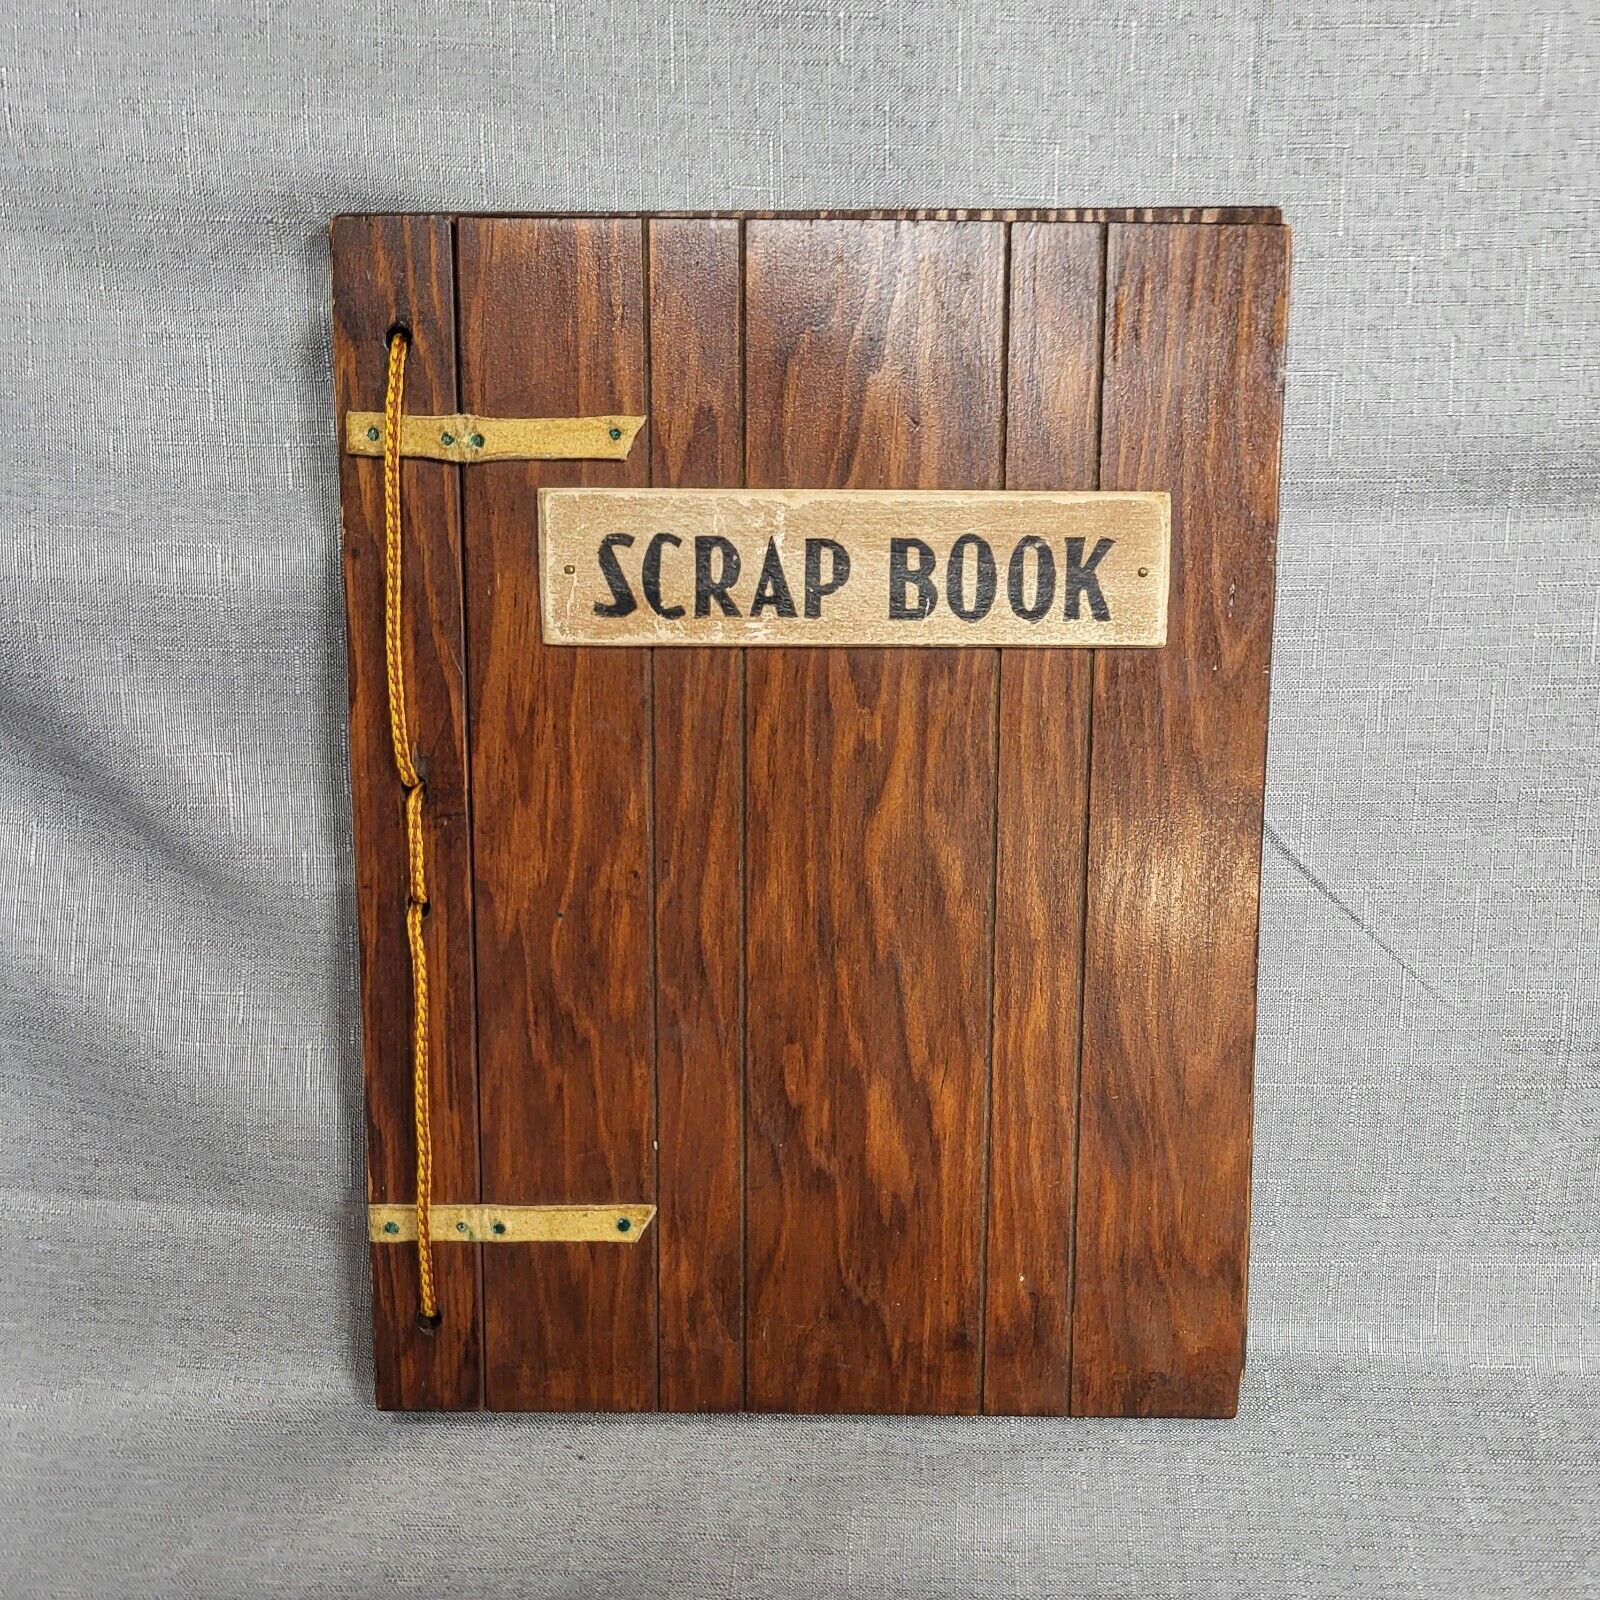 Scrapbook Wooden ANTIQUE VINTAGE WITH LEATHER AND TWINE STRAPS 1940s 9in X 12in